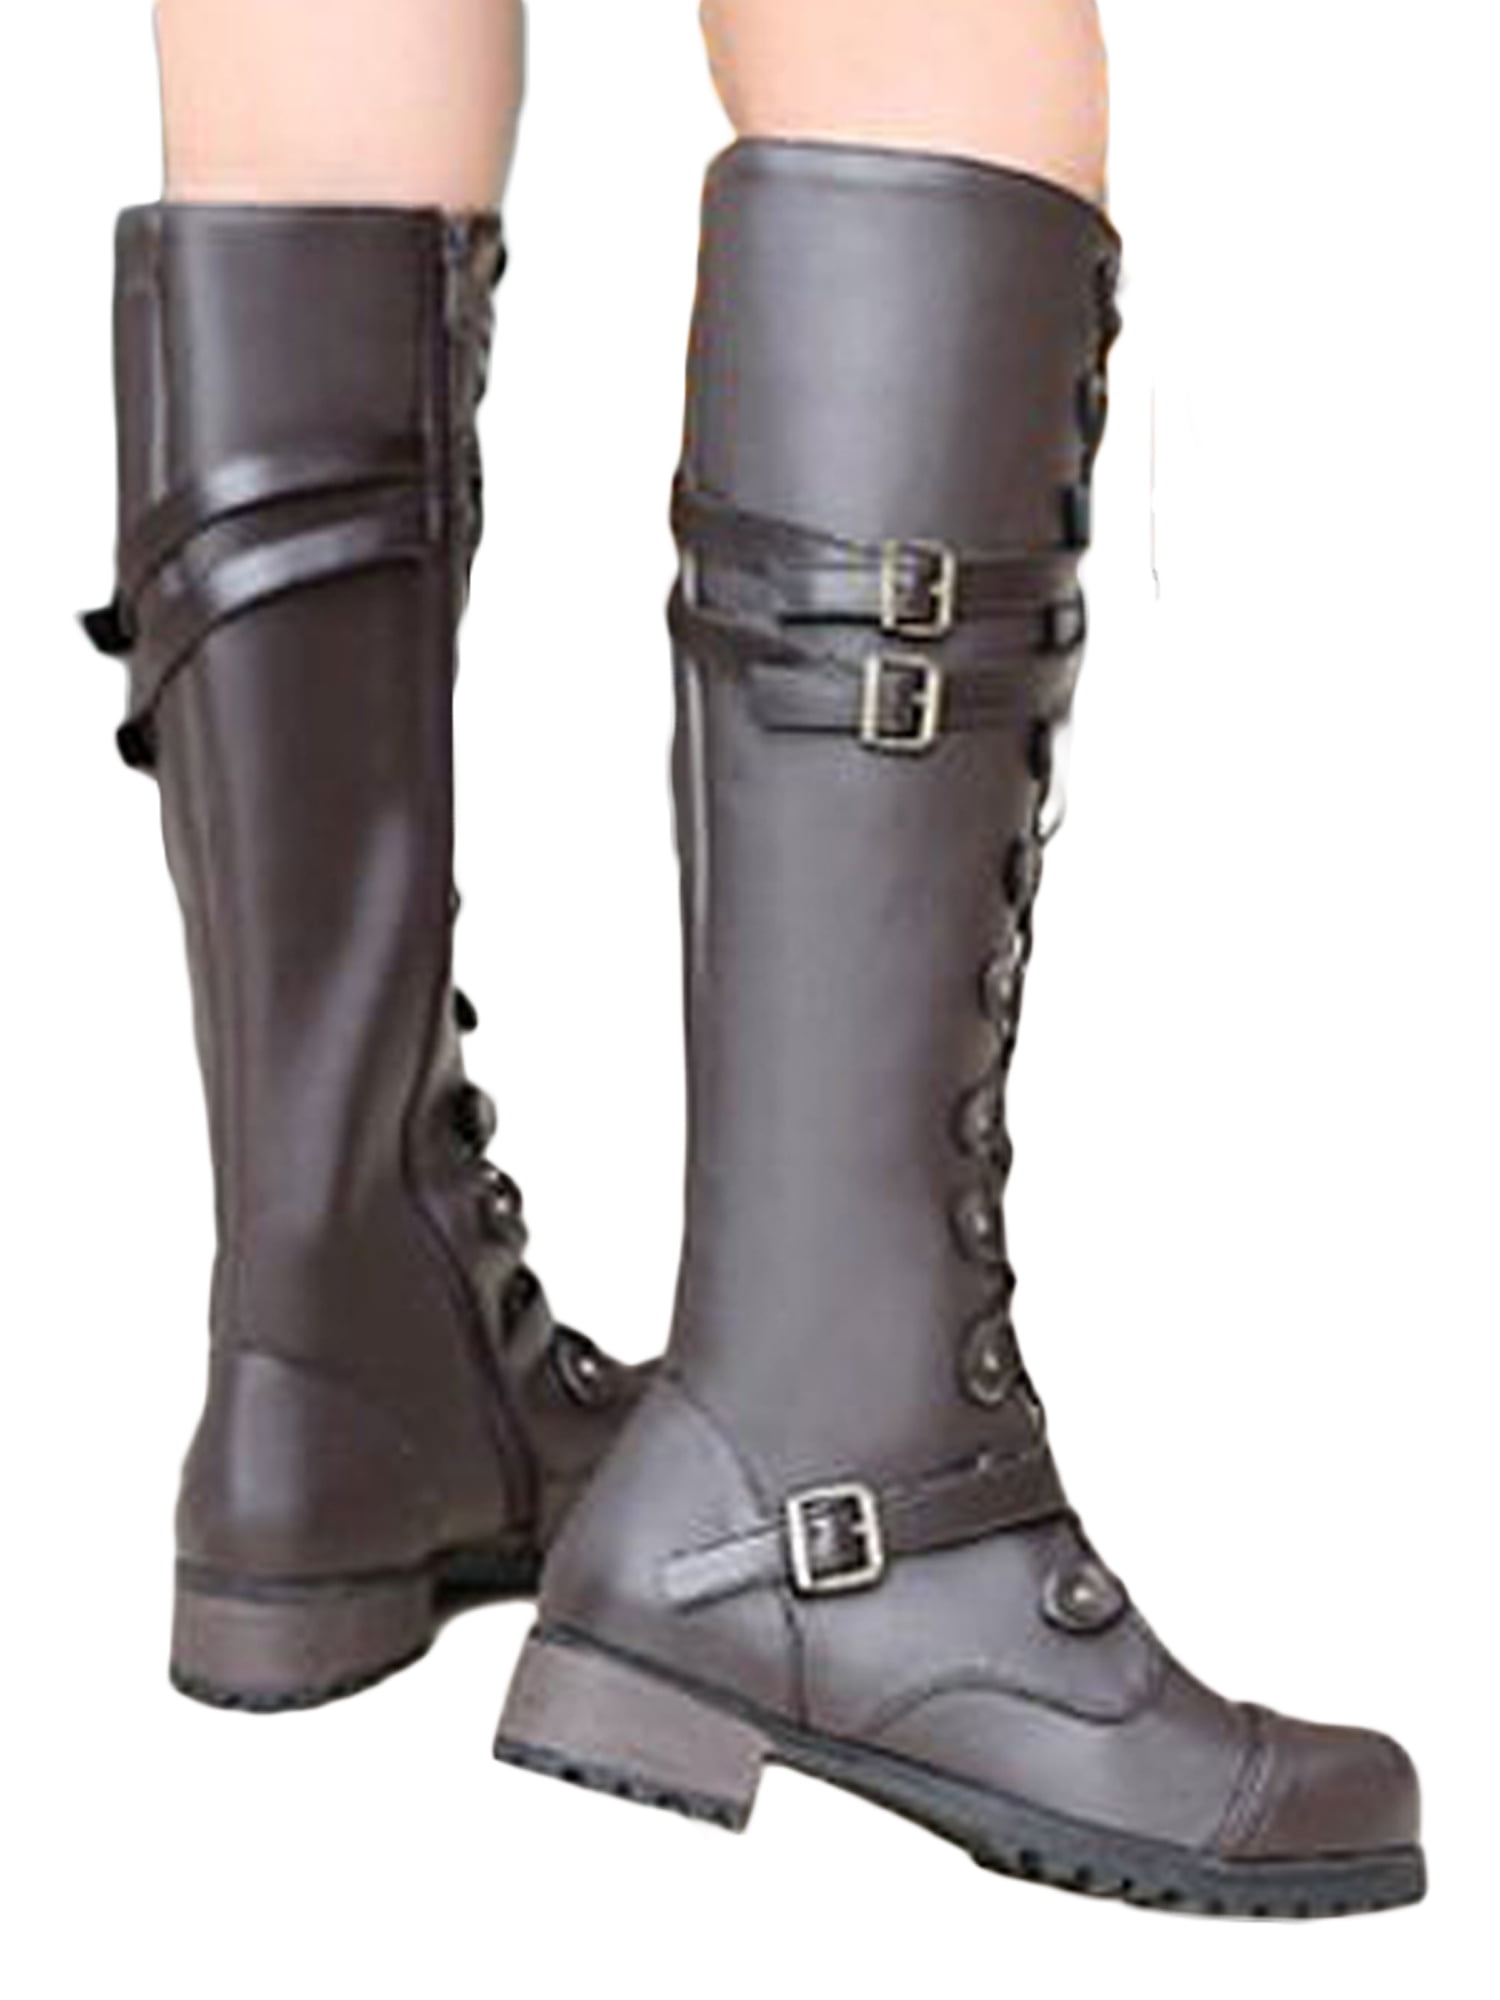 Classic Women's Faux Leather Round Toe Block Heel Knight Knee High Boots Shoes 